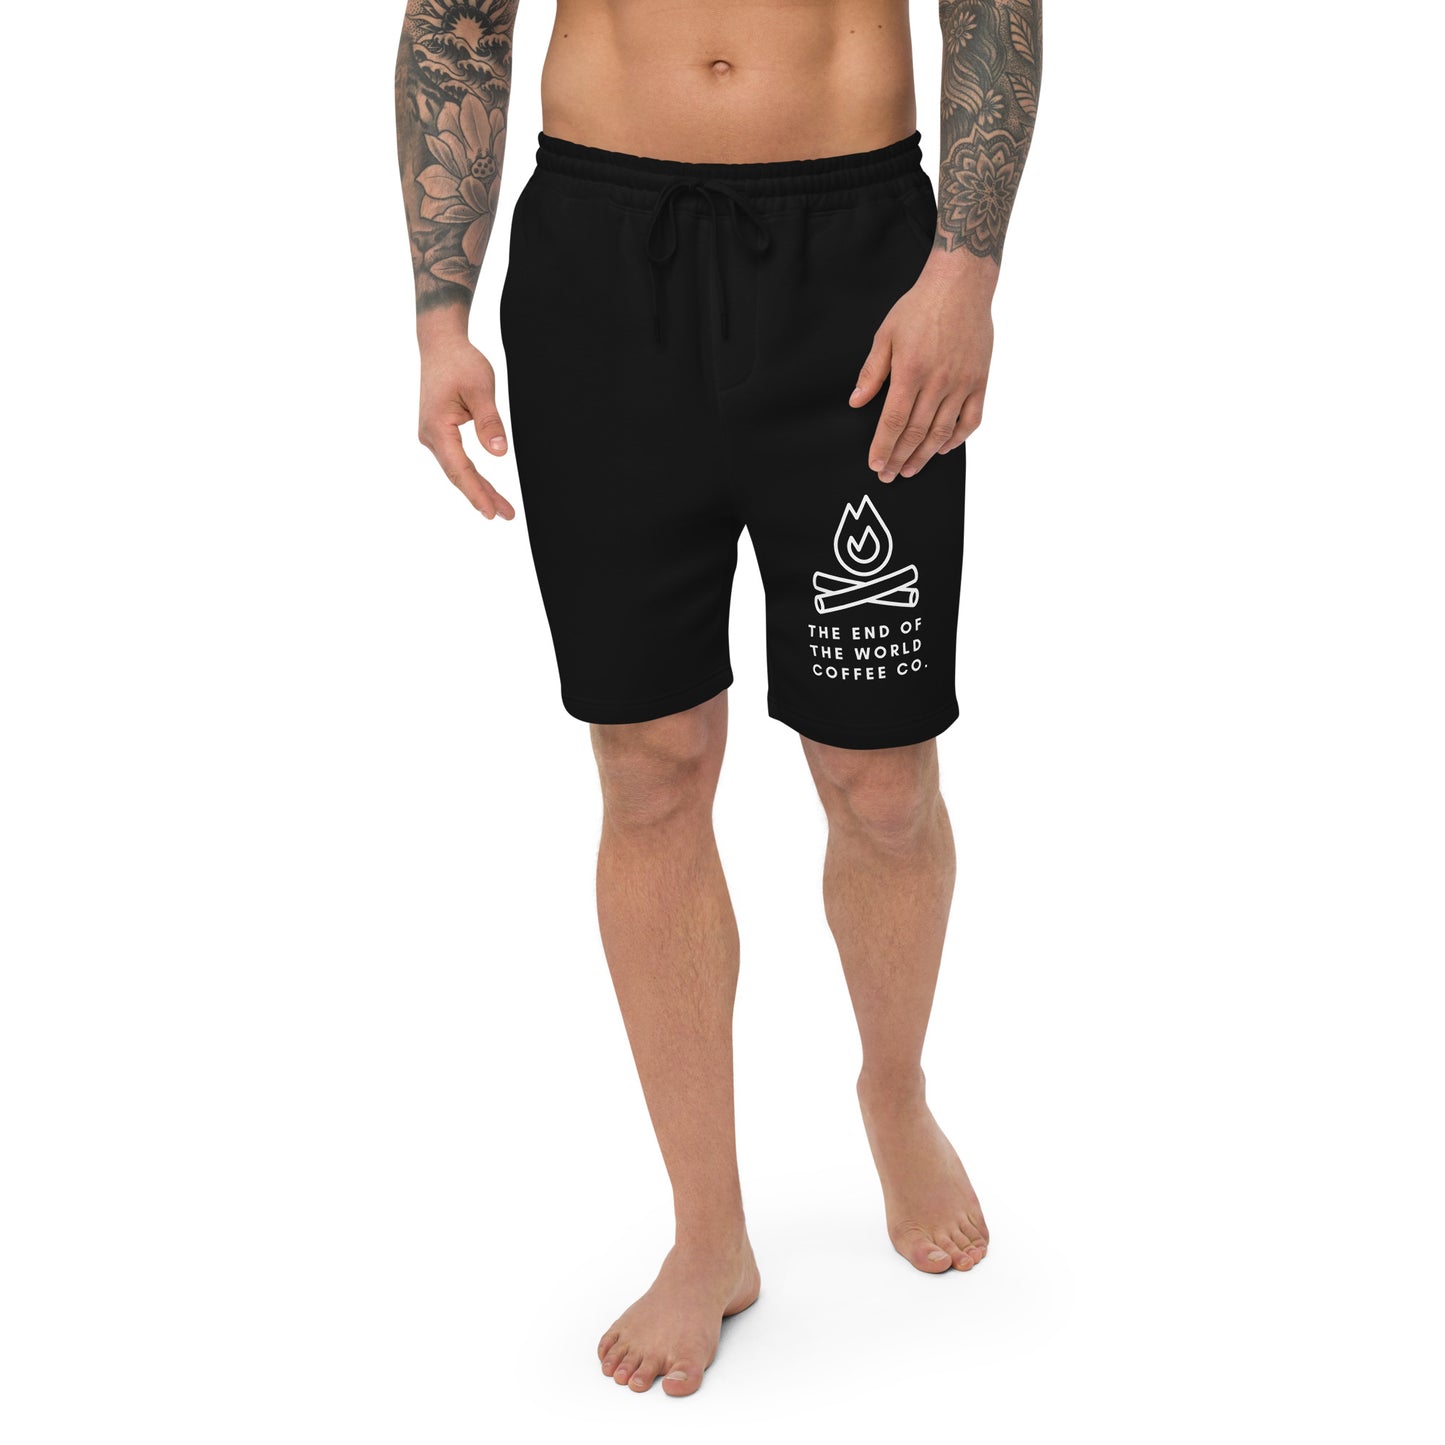 Men's fleece shorts – The End of The World Coffee